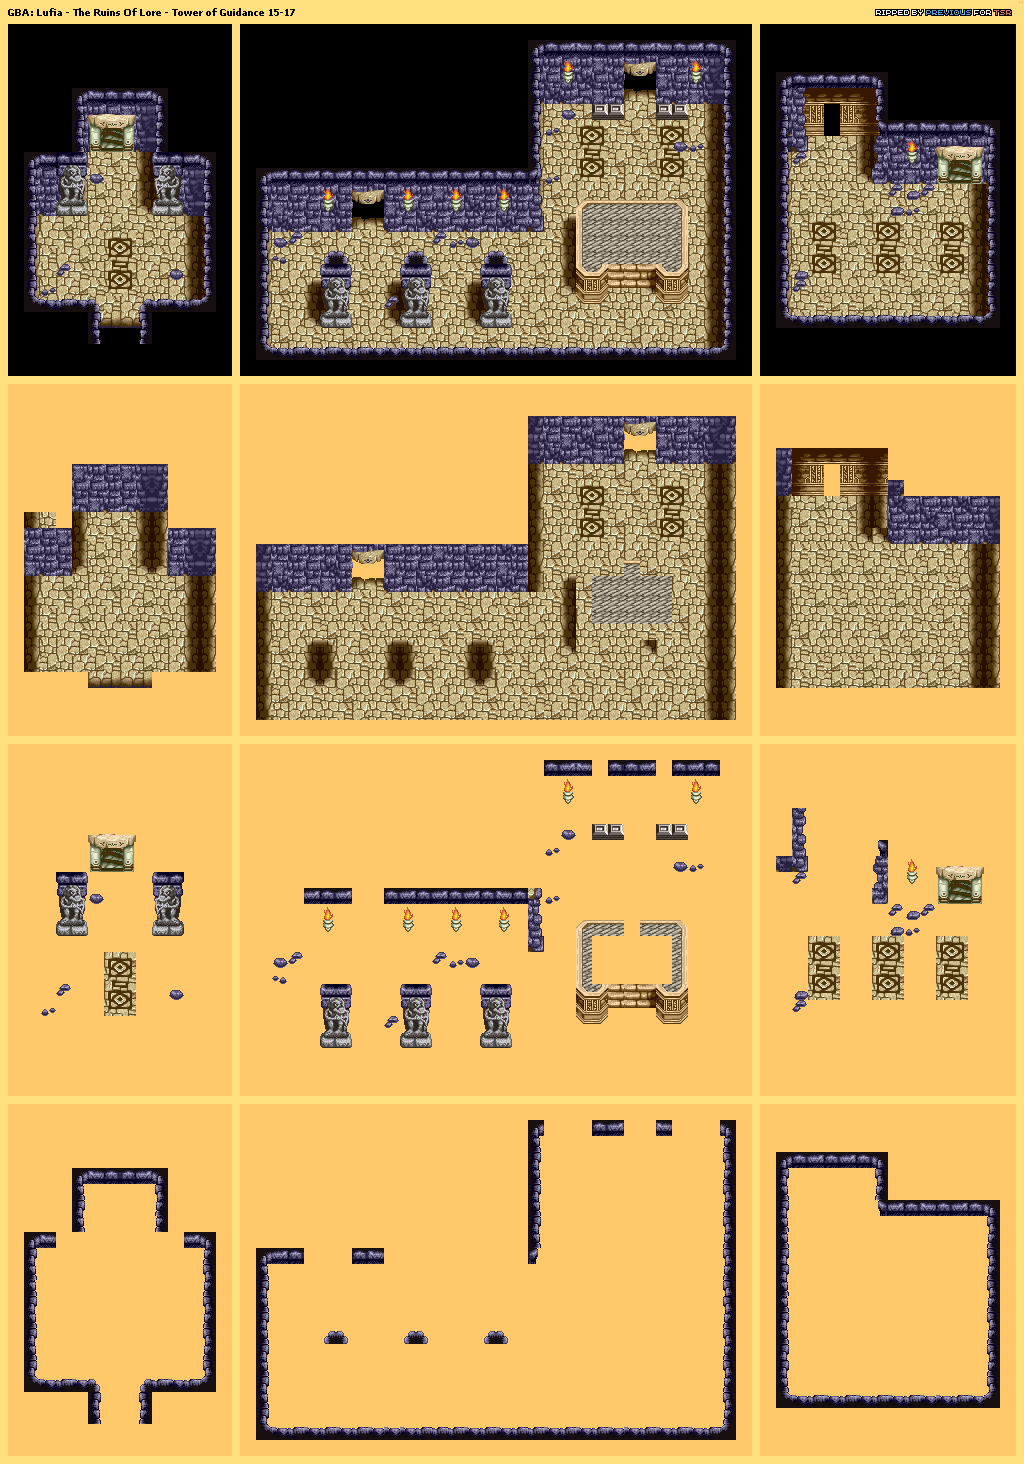 Lufia: The Ruins of Lore - Tower of Guidance 15-17